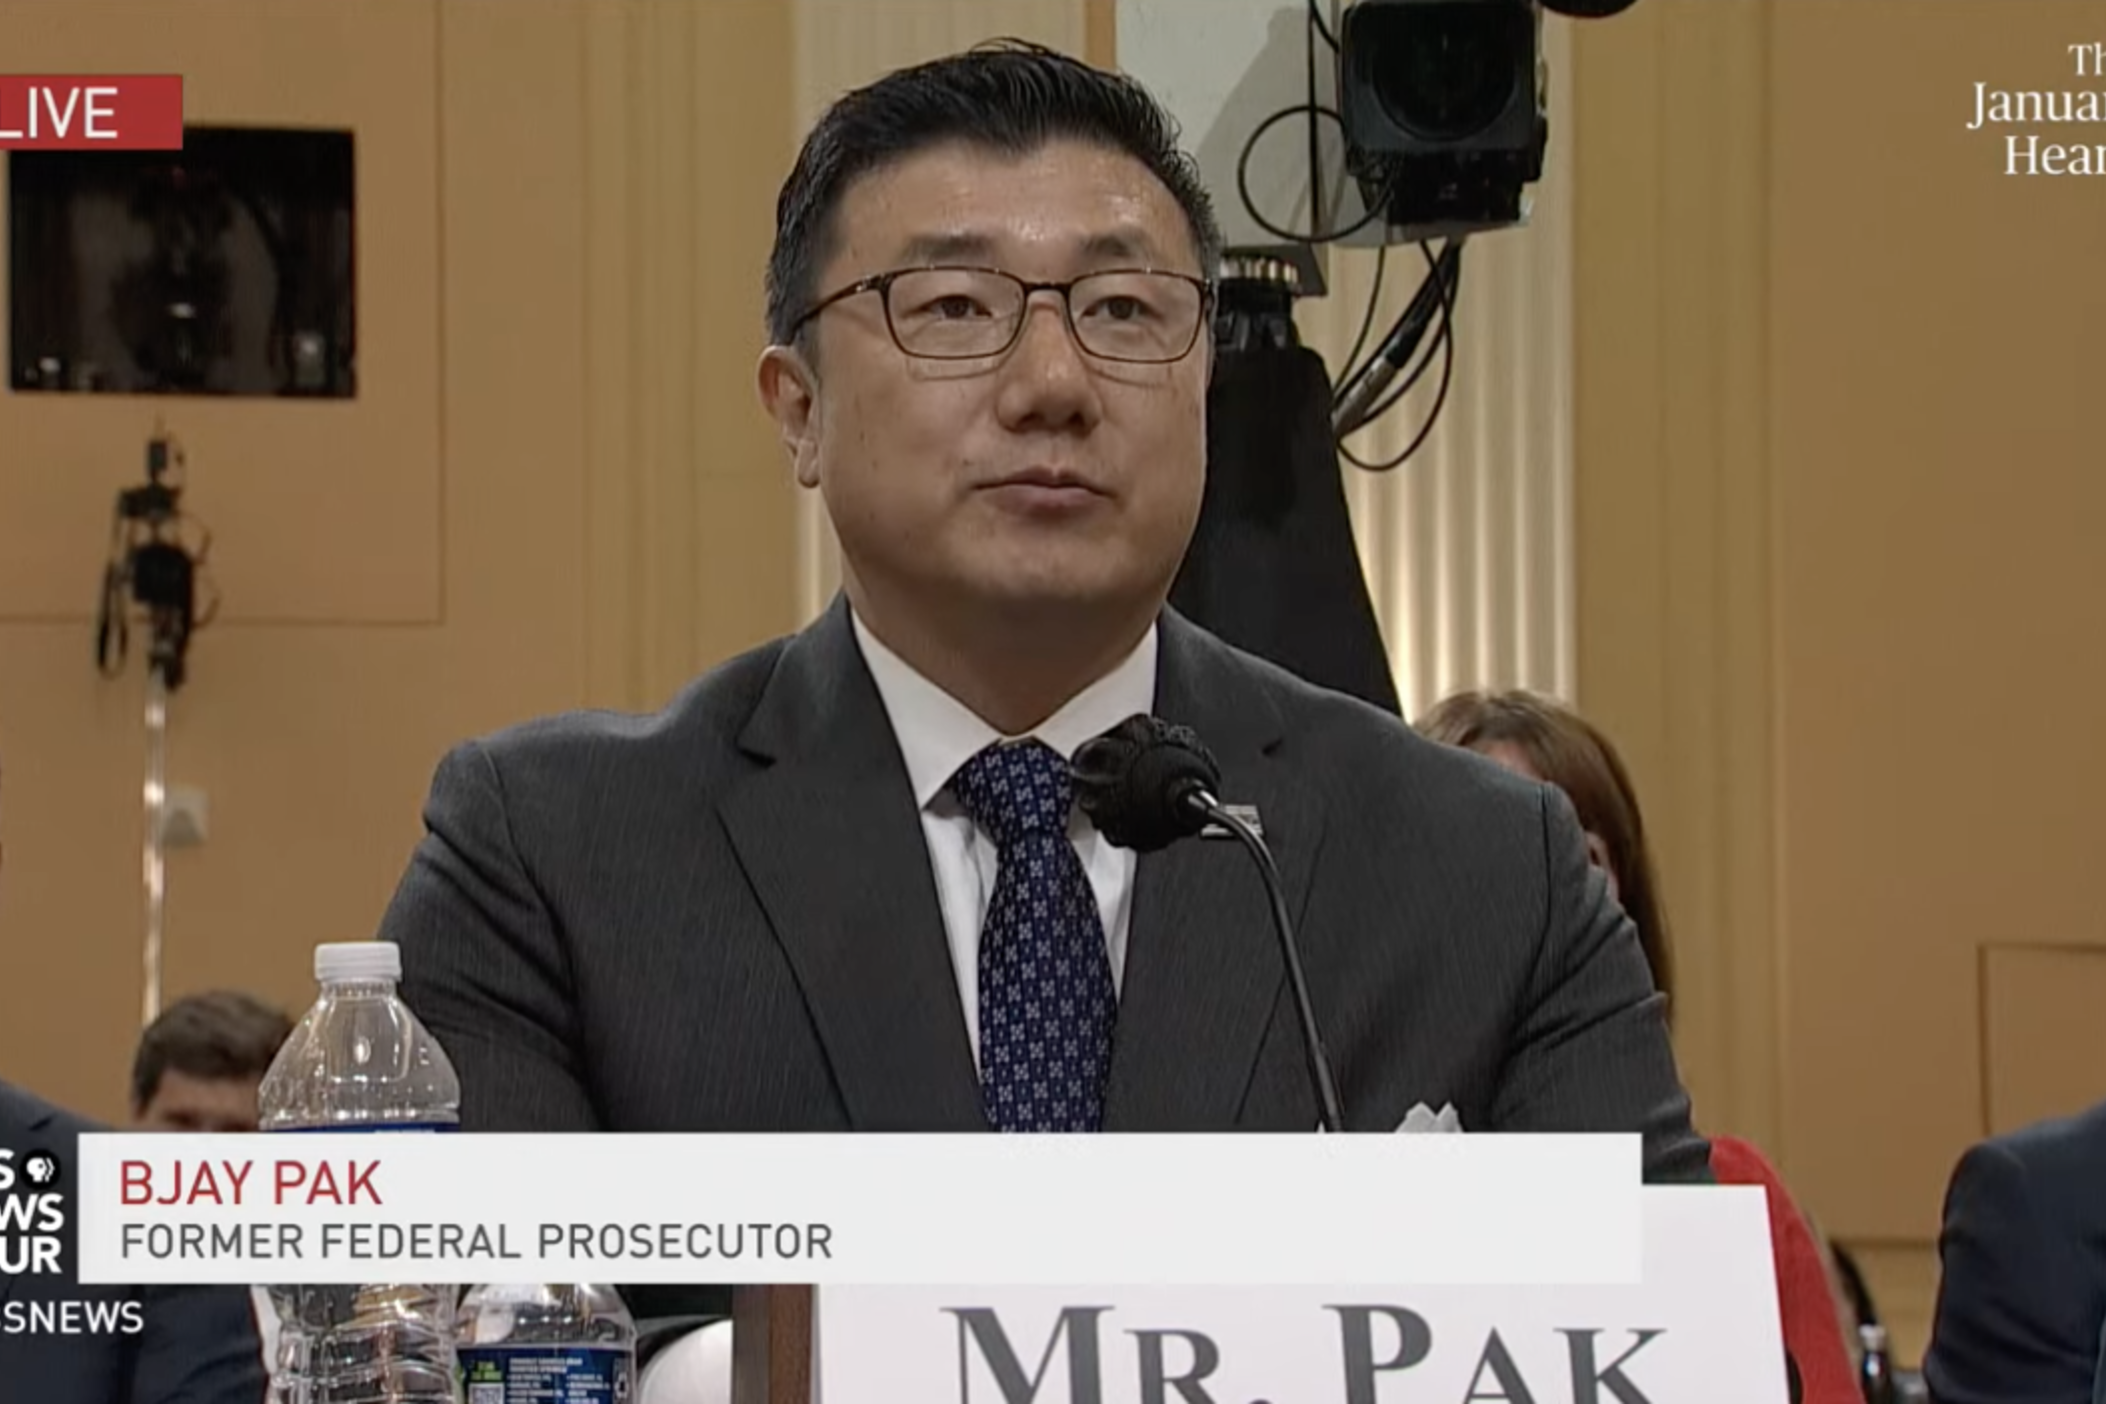 Former U.S. Attorney BJay Pak testified in front of a U.S. House committee investigating the 2021 assault on the U.S. Capitol.